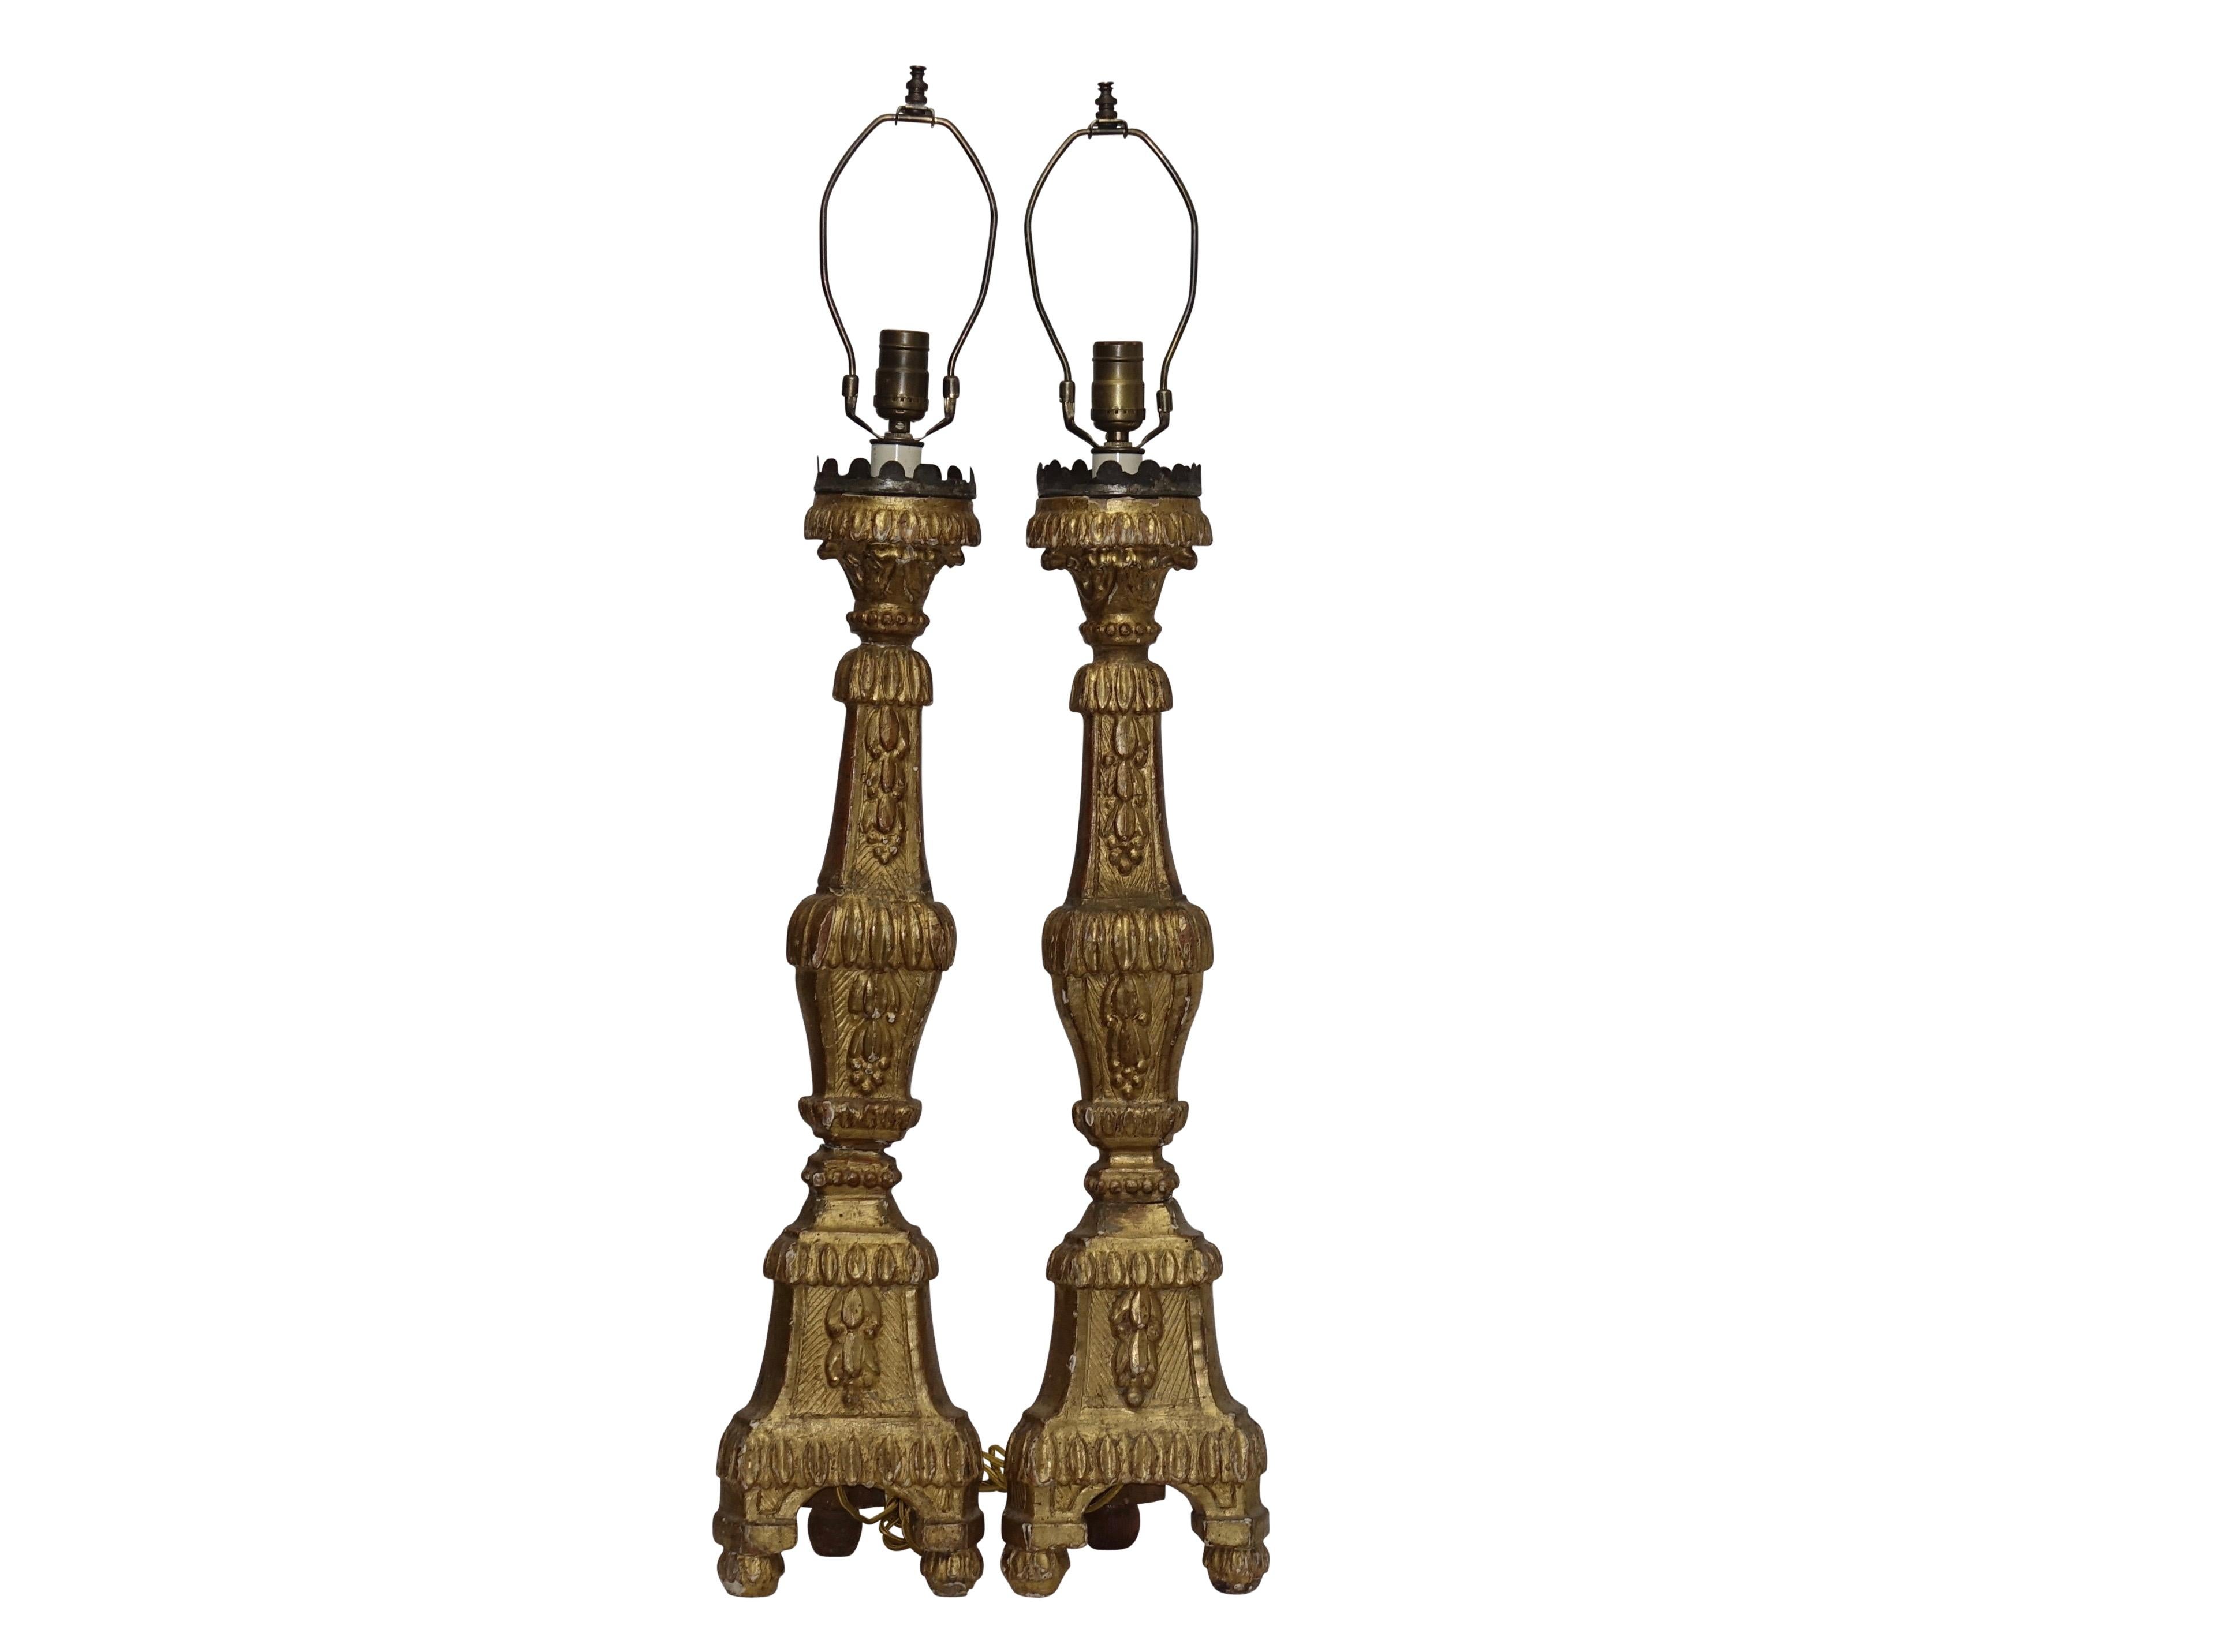 A pair of carved and giltwood altar candle sticks with tin cups having a scallop rim, now electrified as lamps. Recently re-wired. Italy, 18th century.
Height measurement to the top of the socket is 31 inches.